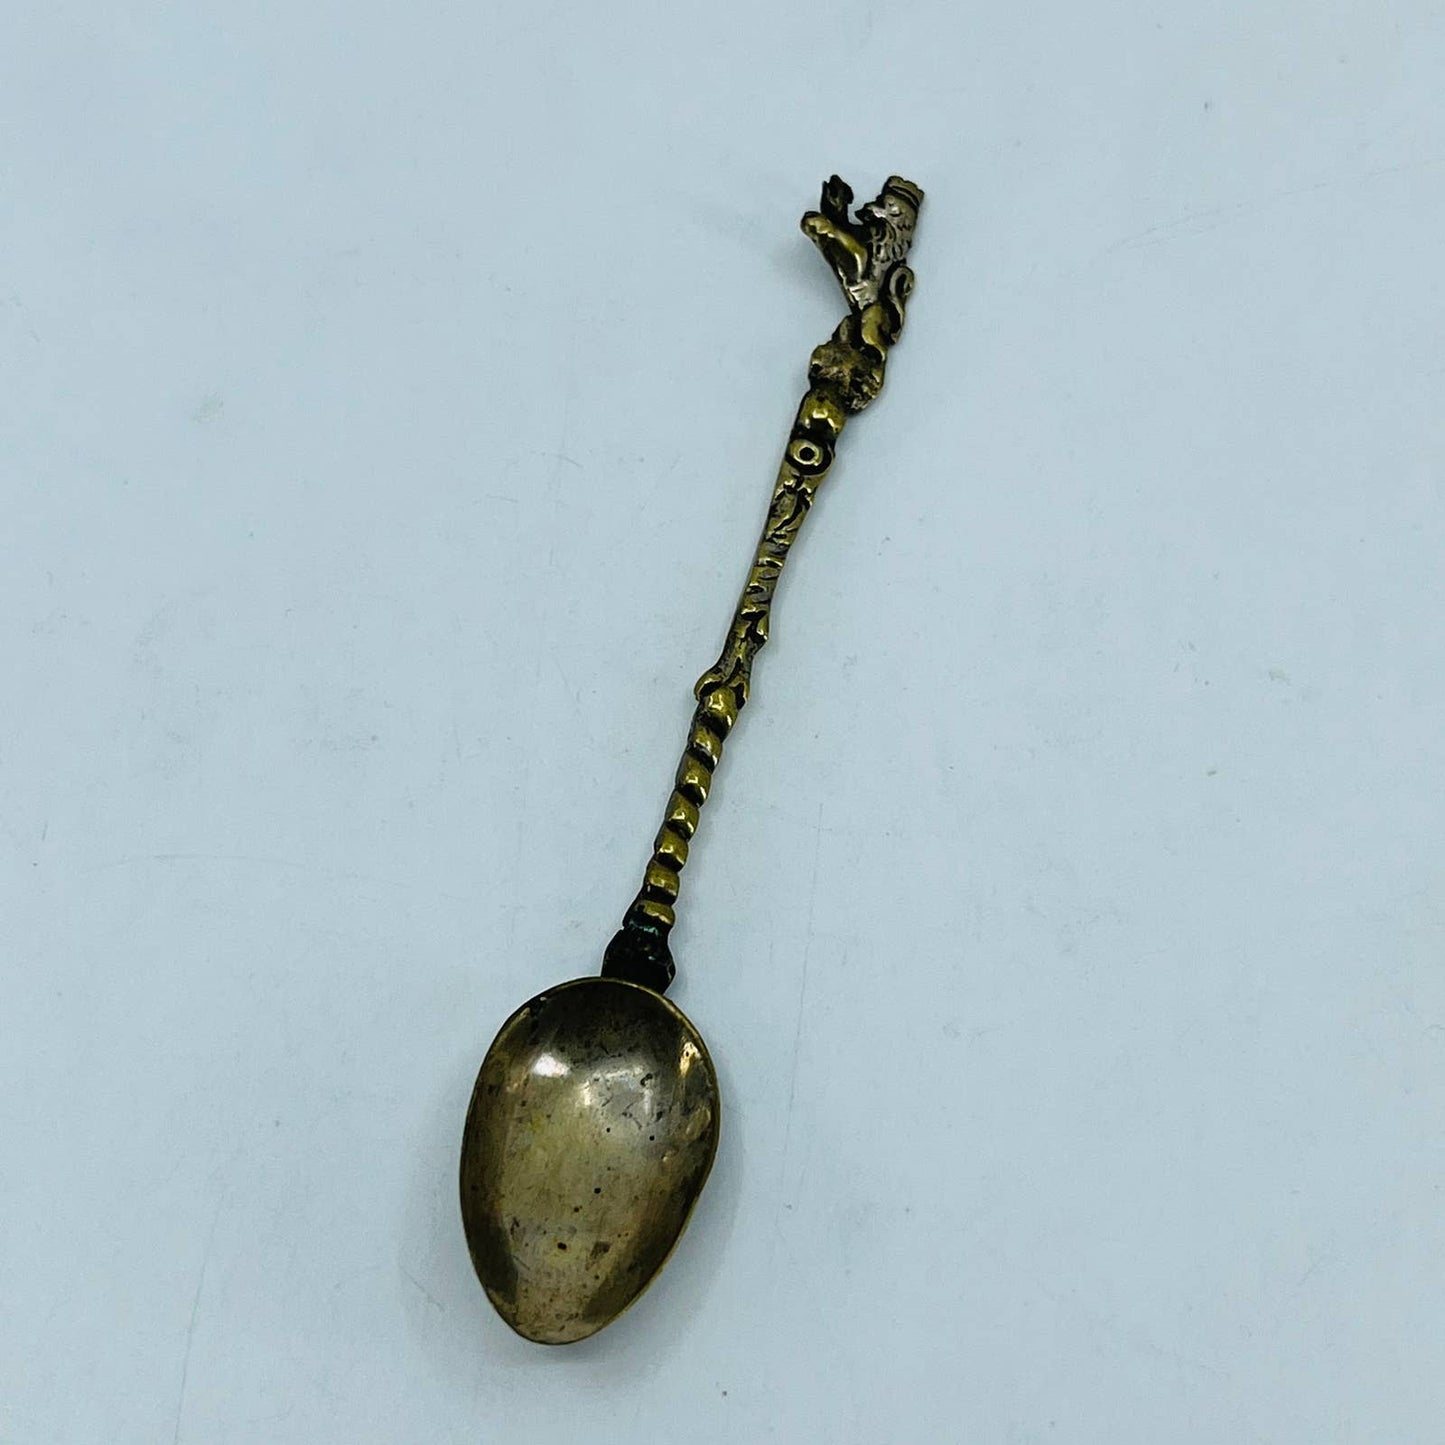 Vintage ITALY Collector Souvenir Spoon 4.25" Silver/Brass Winged Crown Lion SB7